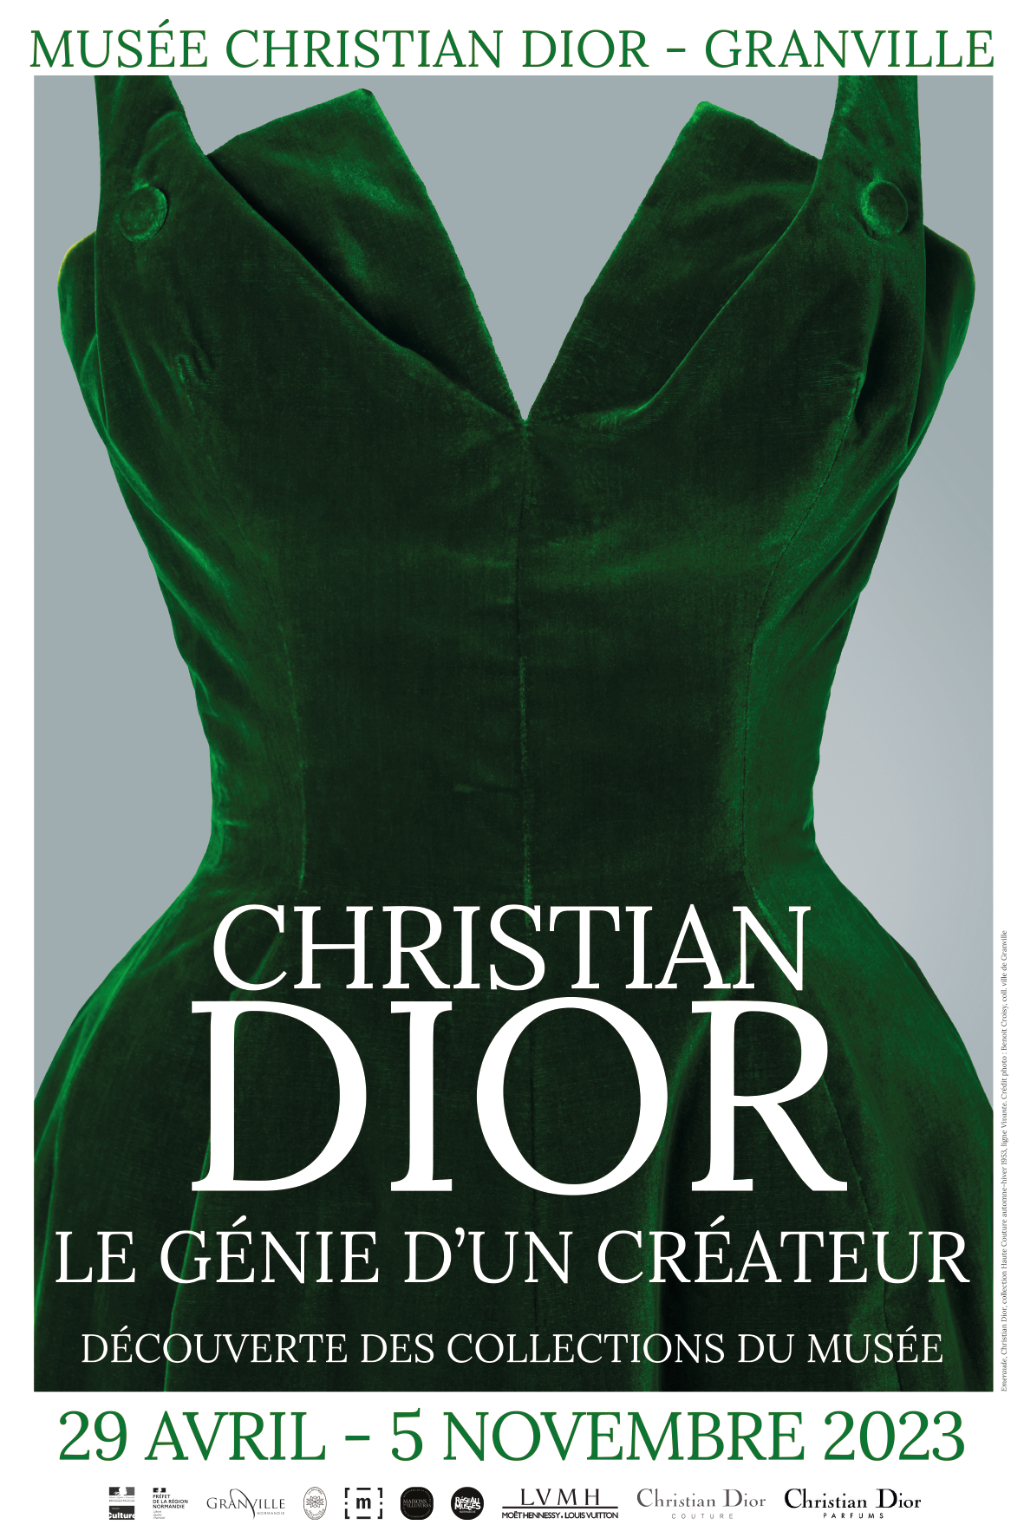 Affiche exposition 2023, Musée Chistian Dior